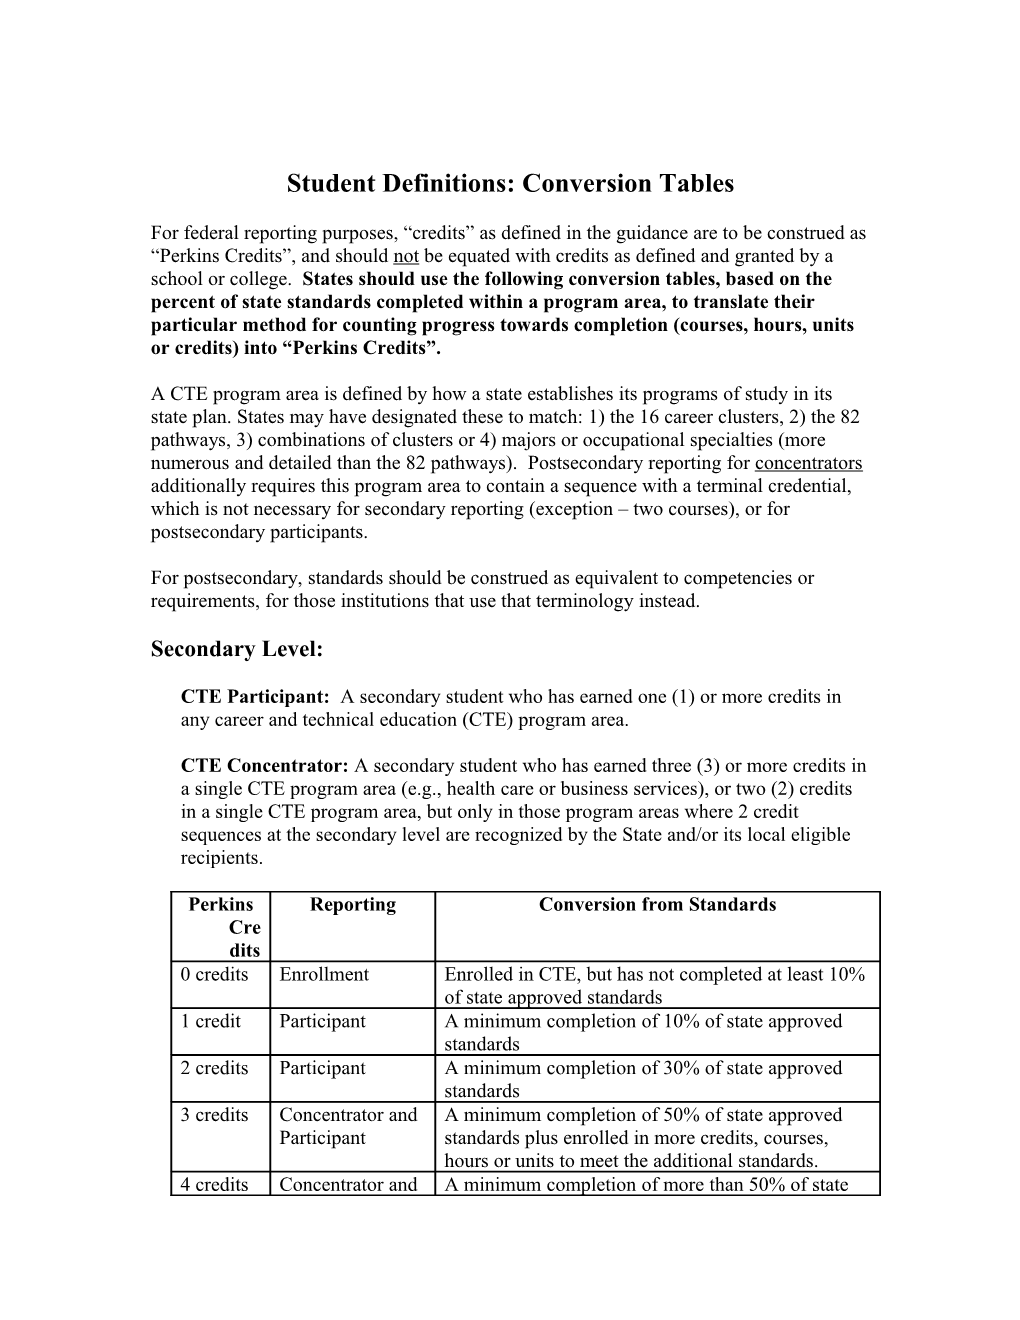 Student Definitions: Conversion Tables